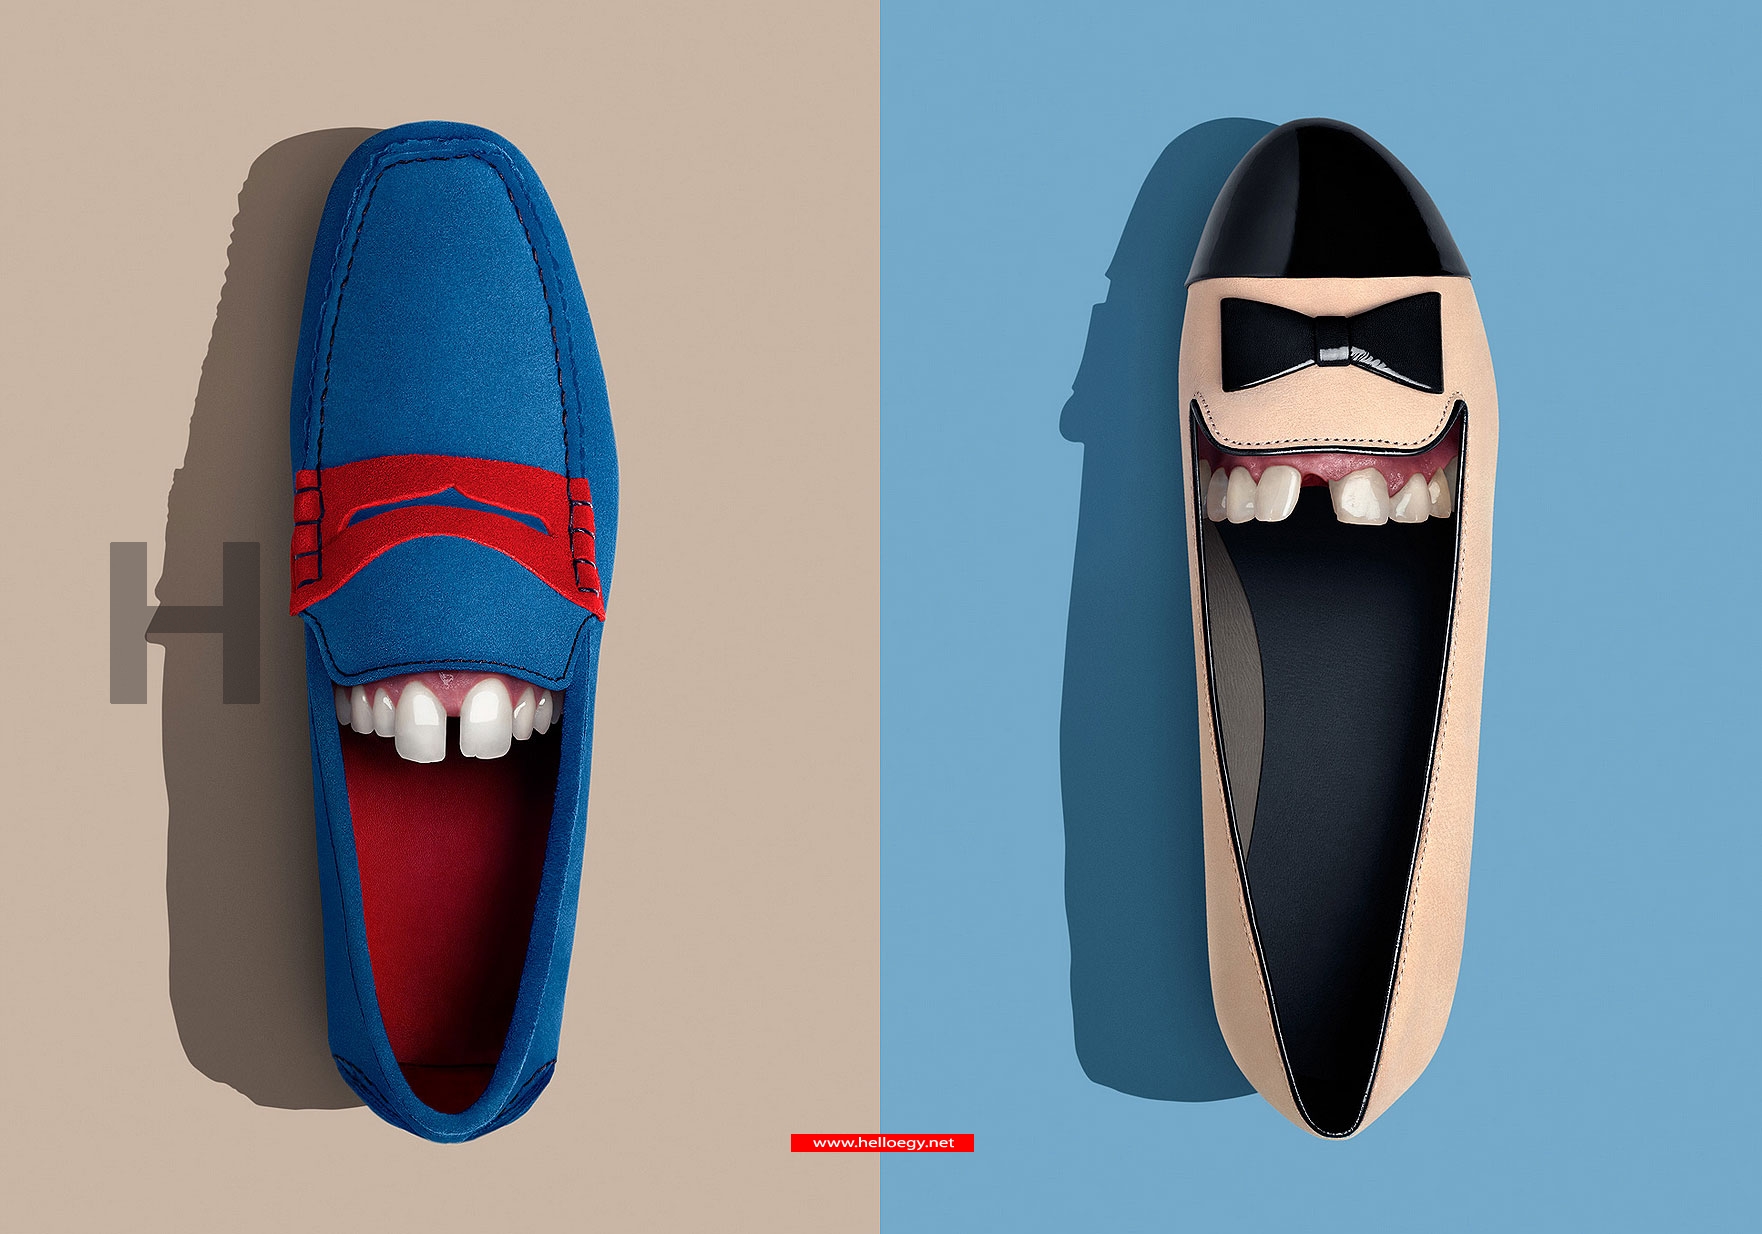 A New Fed .. Shoes with Teeth